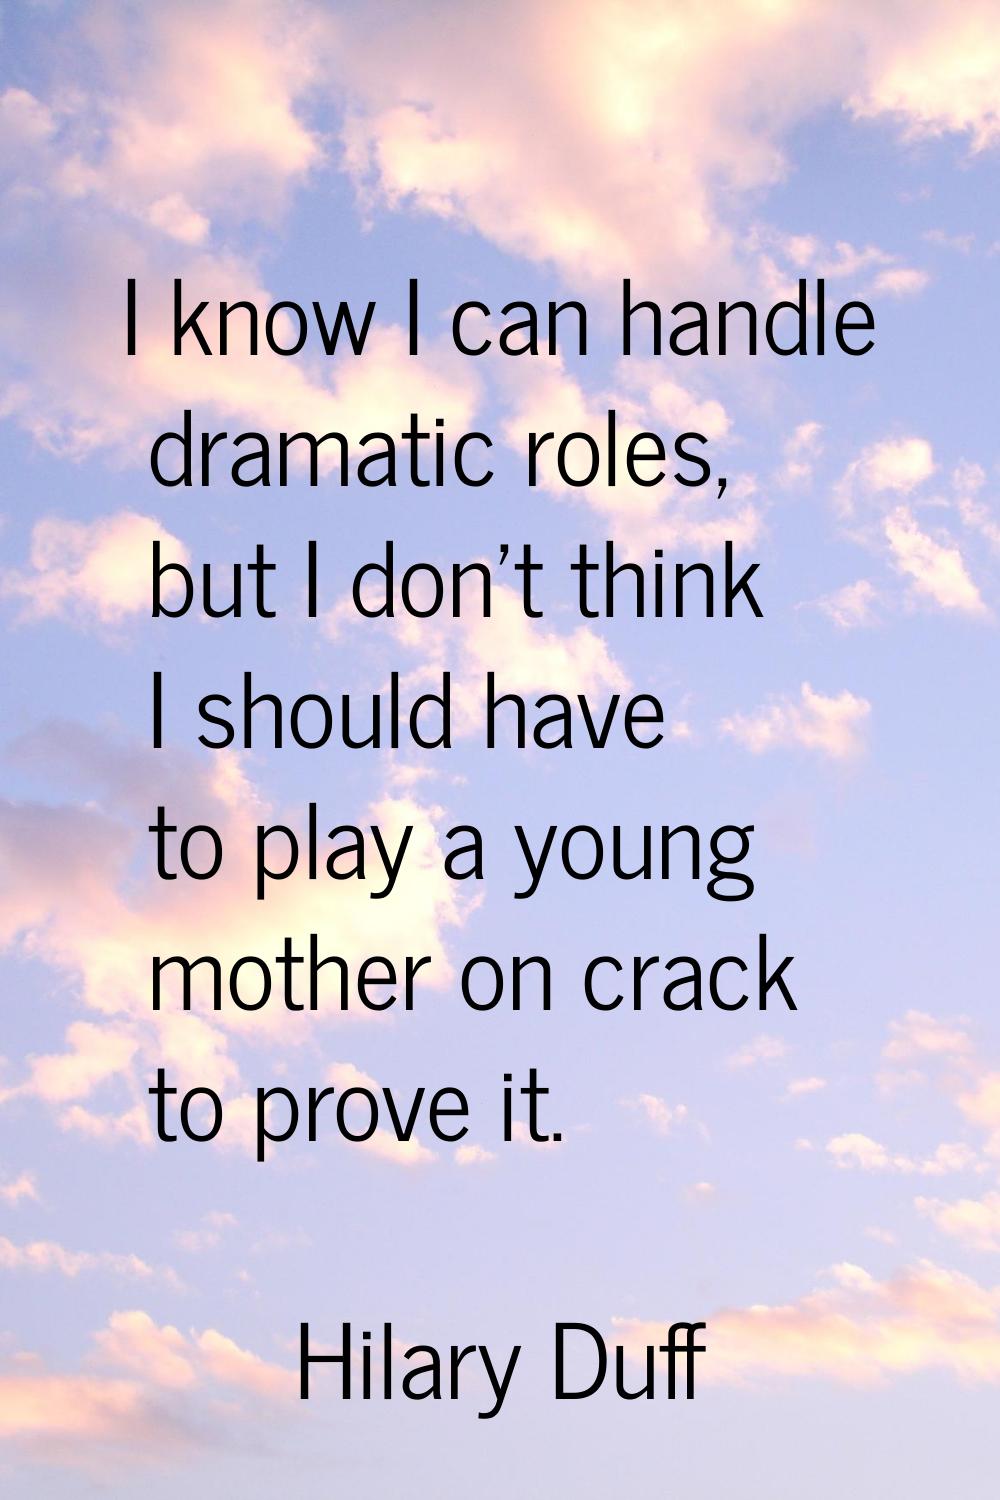 I know I can handle dramatic roles, but I don't think I should have to play a young mother on crack